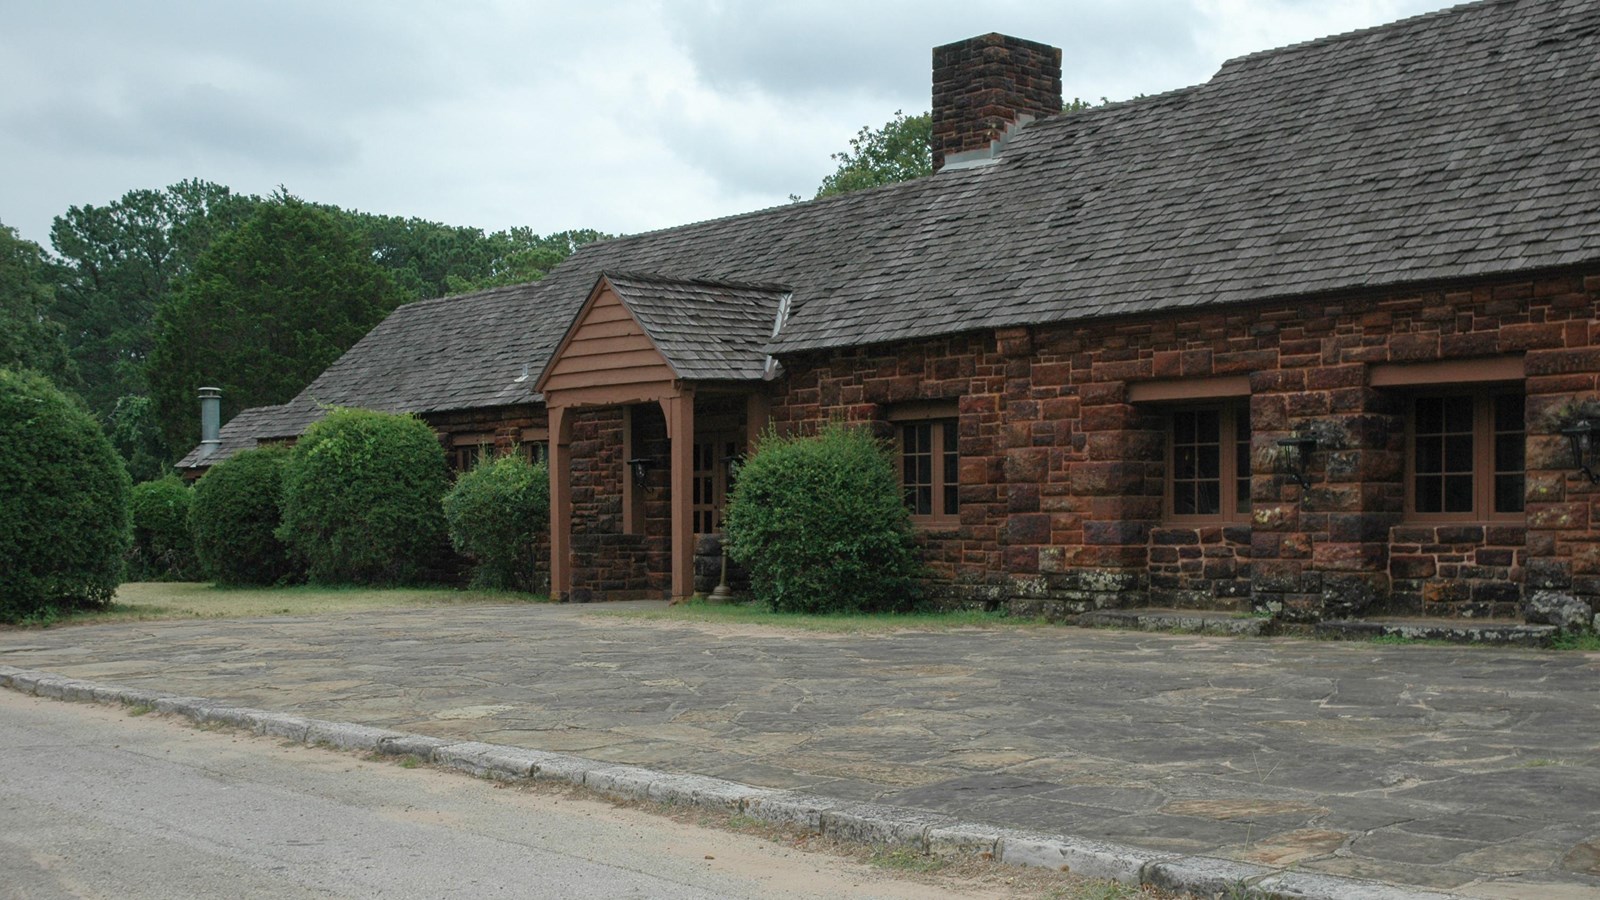 A large brown single-story building with a shingled roof.